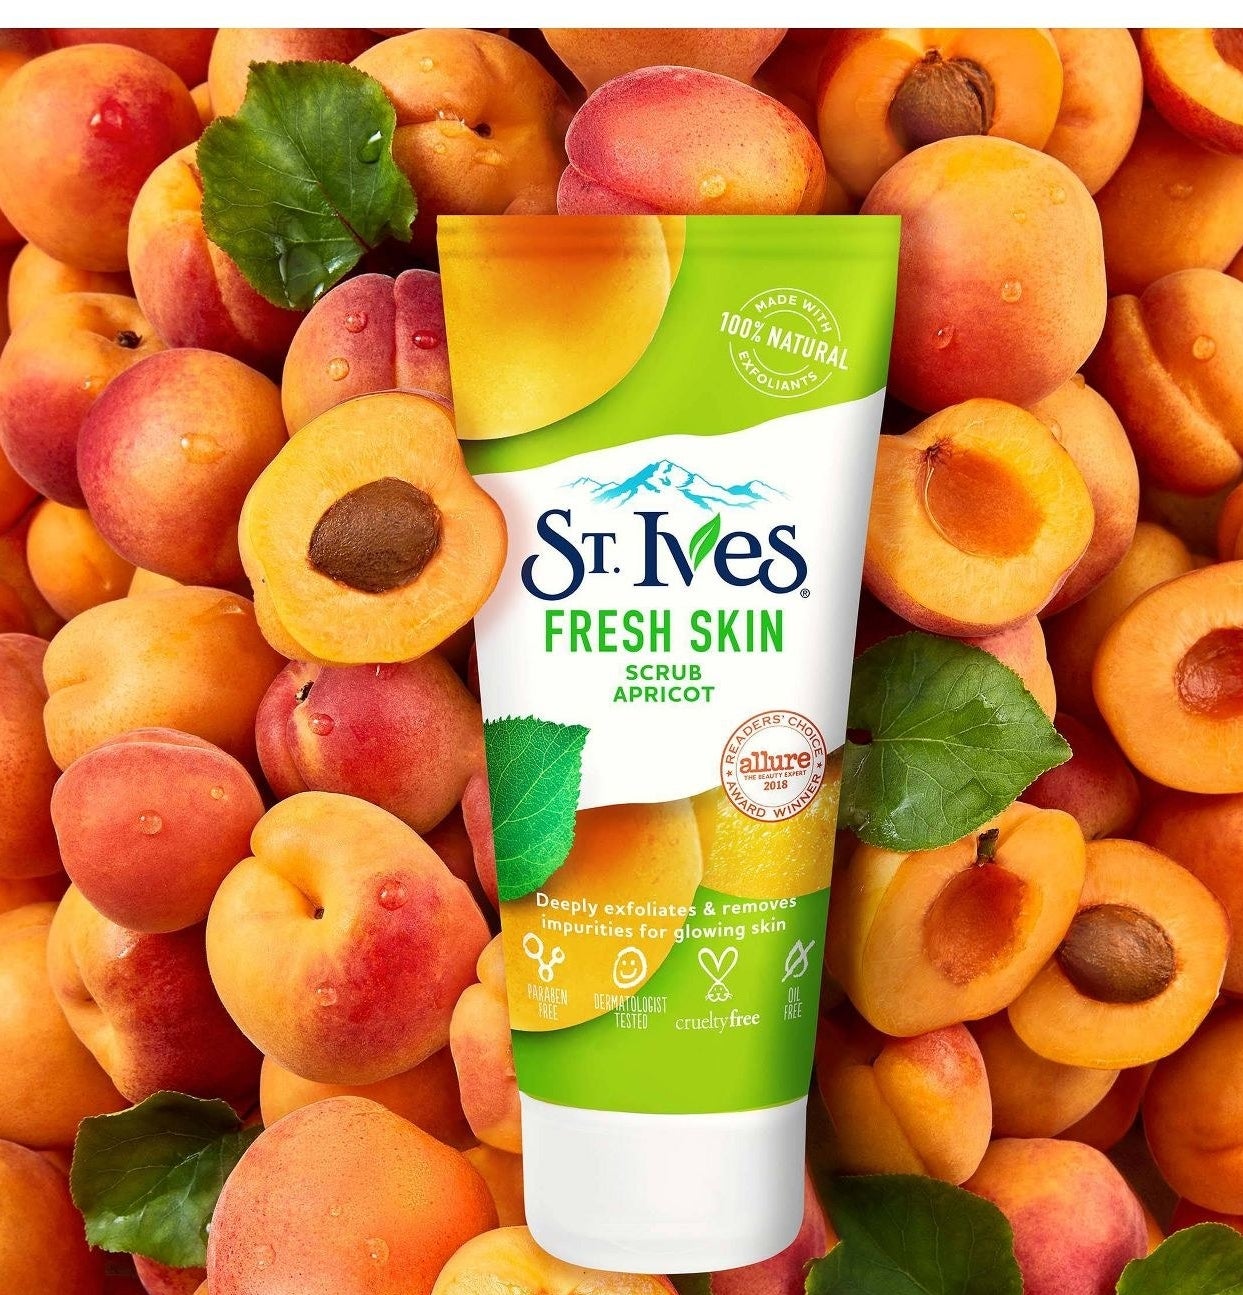 The  St. Ives apricot facial scrub